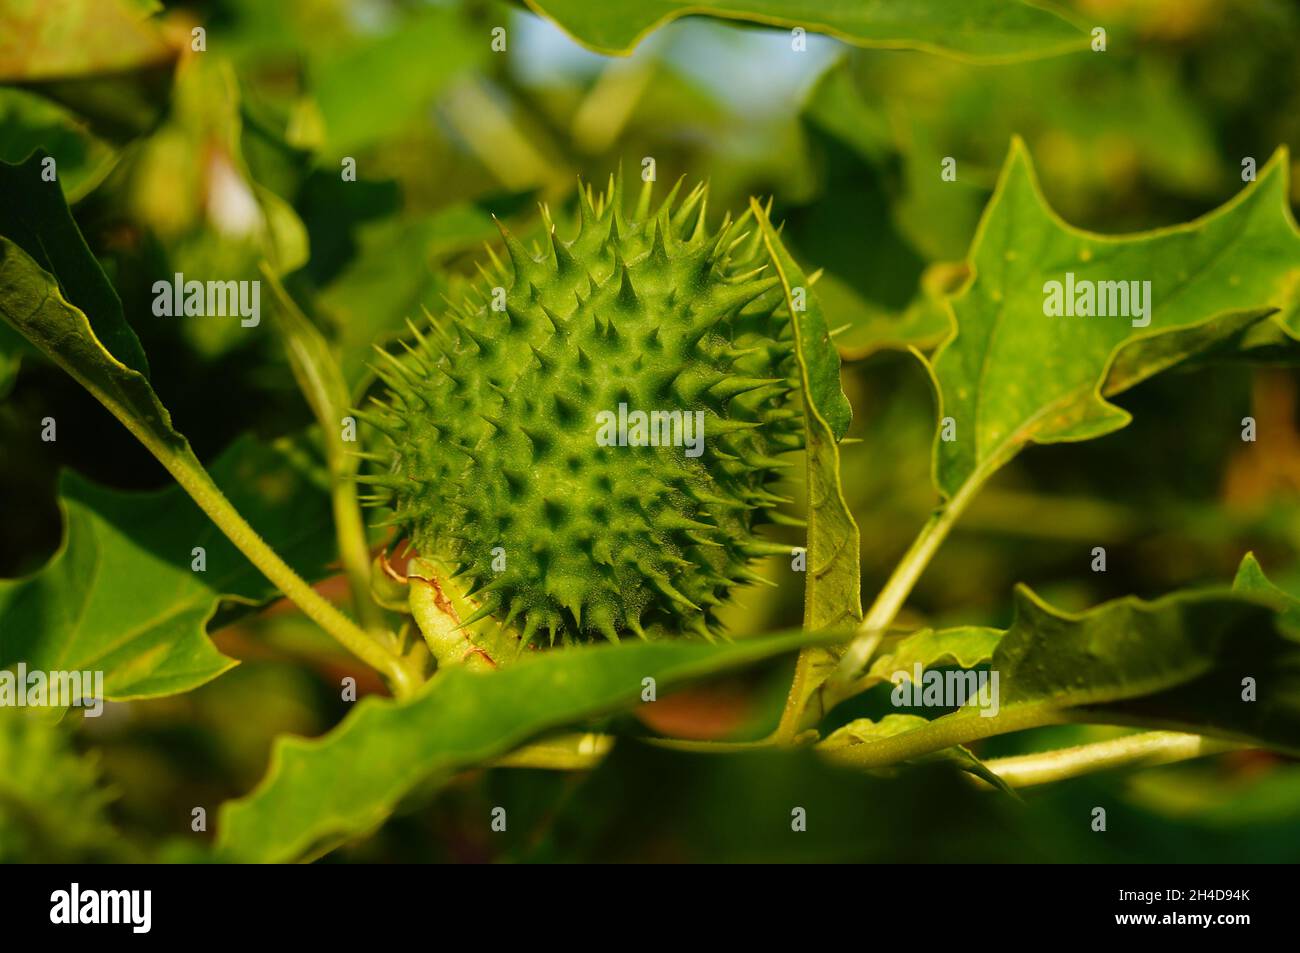 Immature fruit of the thorn apple Stock Photo